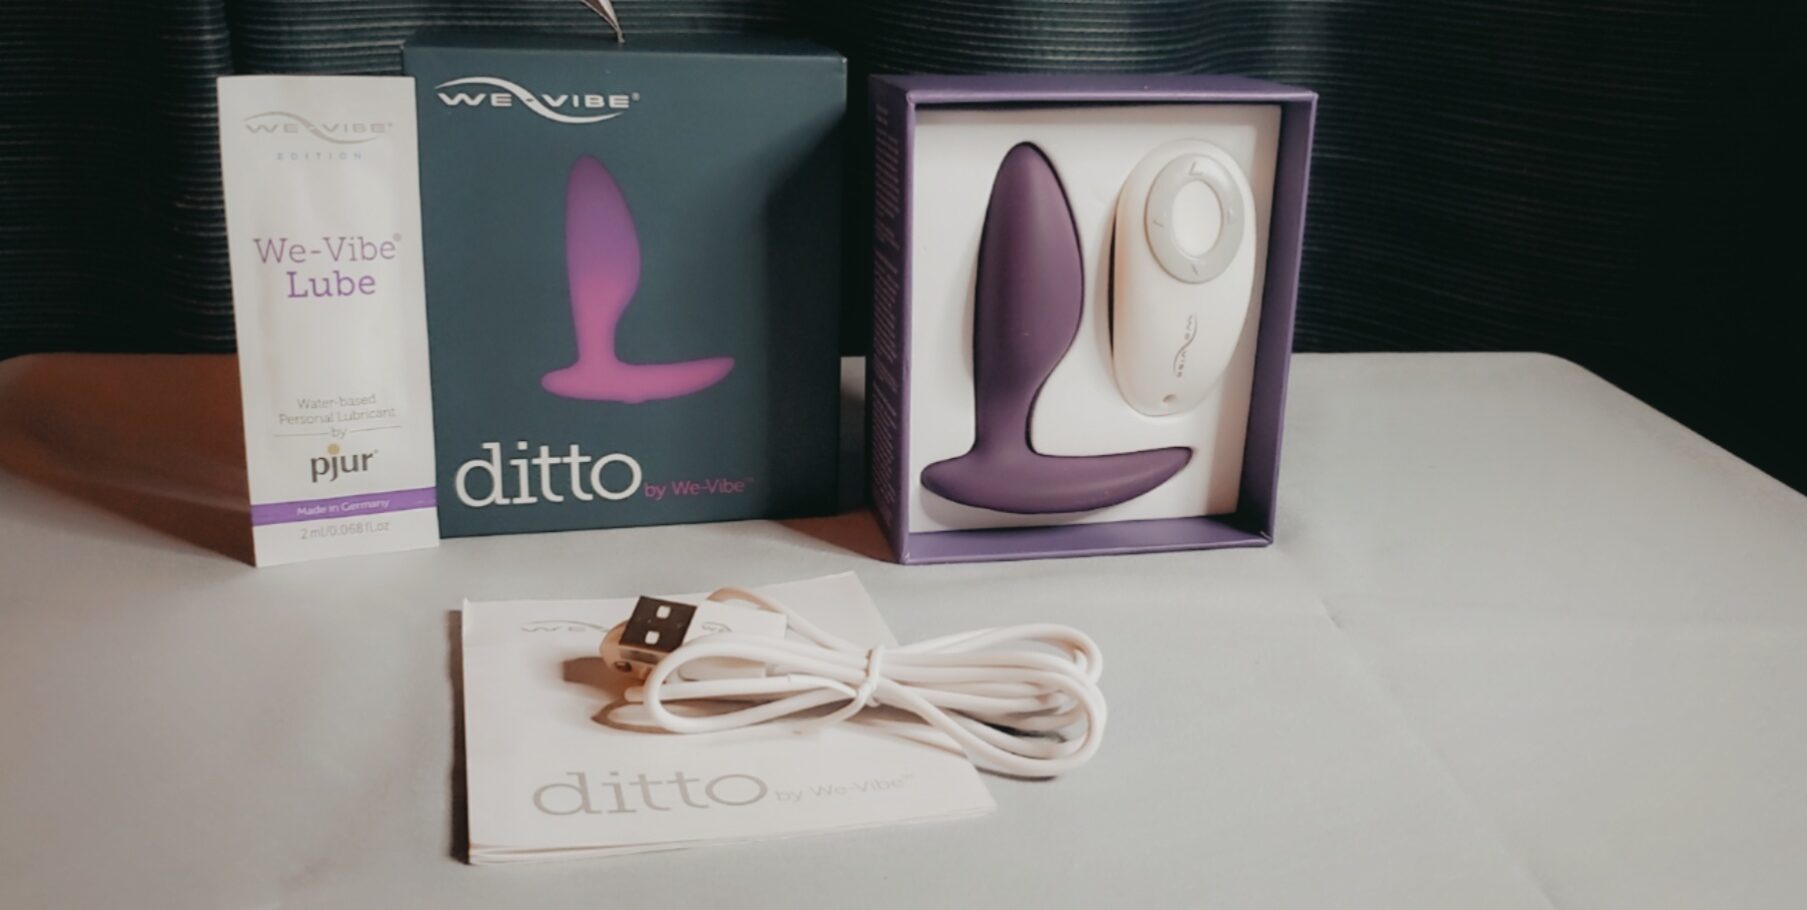 We-Vibe Ditto. Slide 3